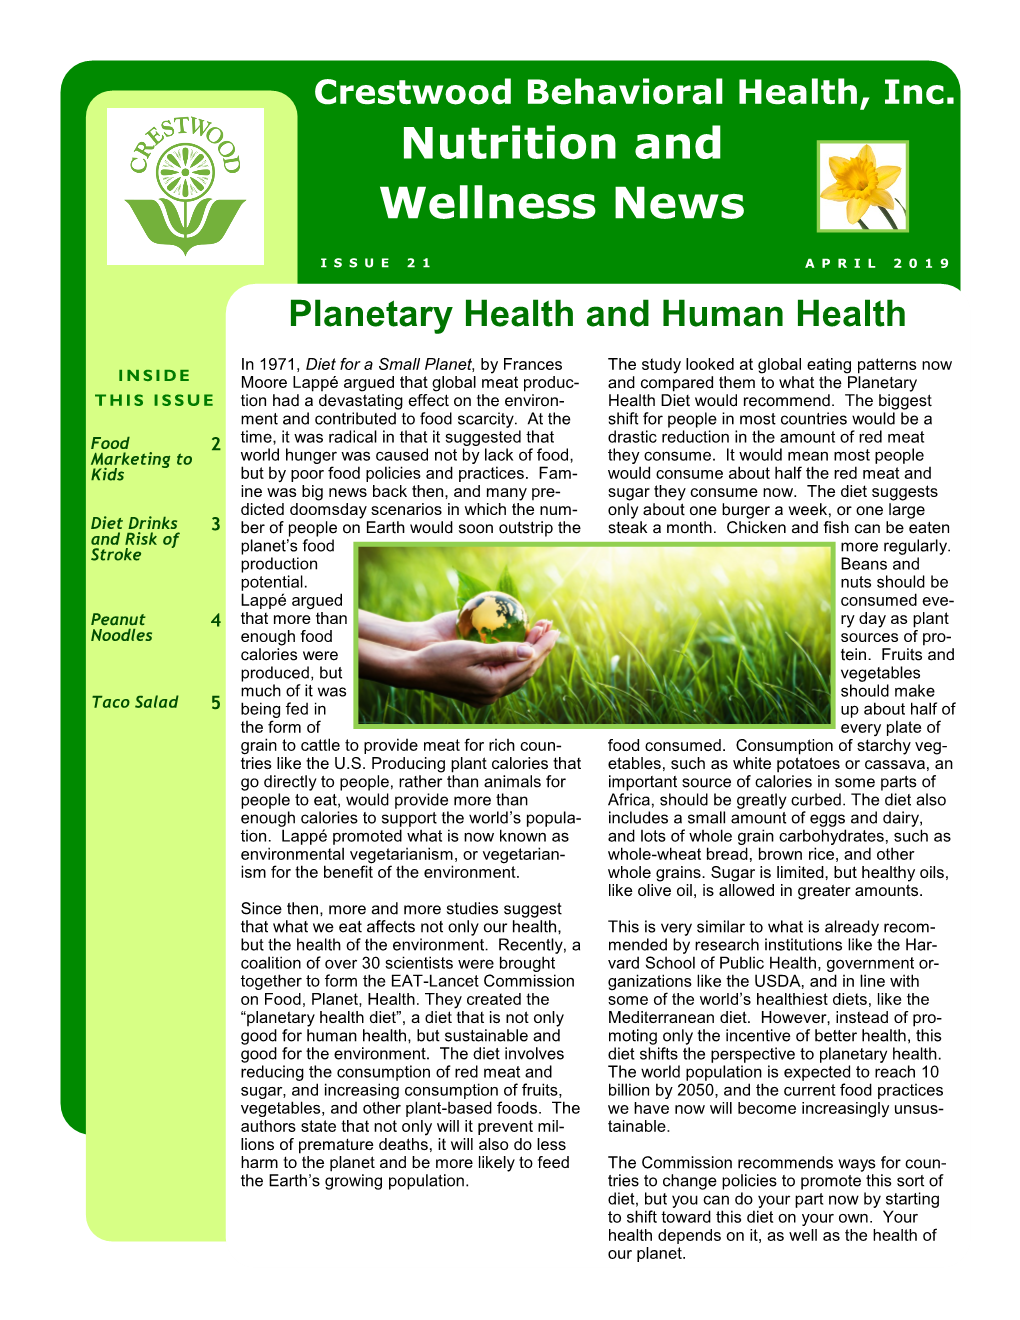 Download Our April 2019 Nutrition and Wellness Newsletter